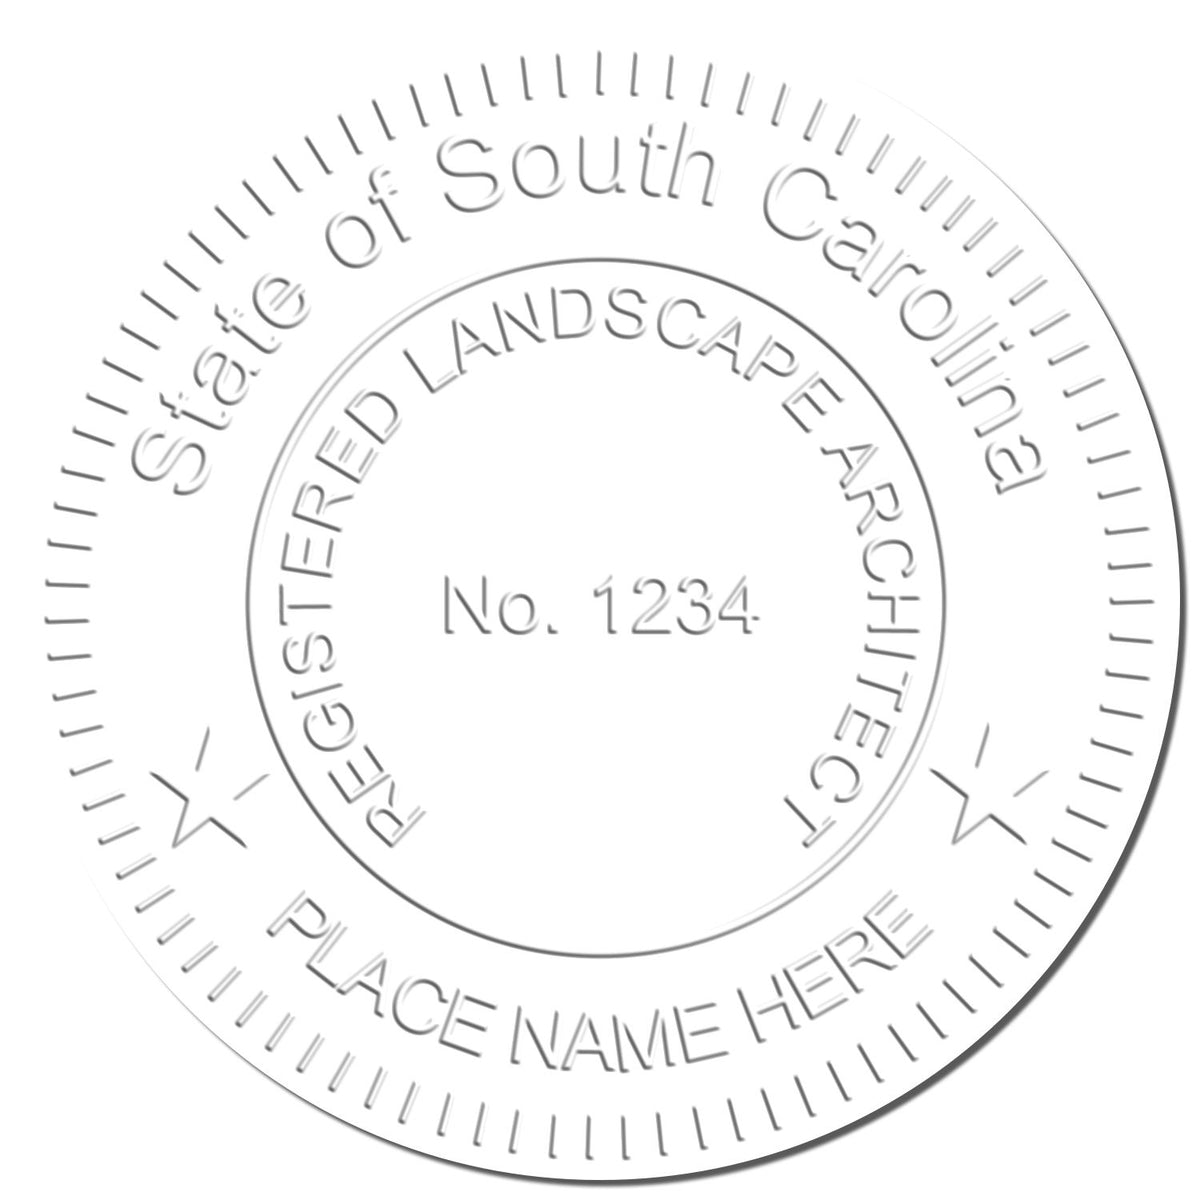 This paper is stamped with a sample imprint of the Hybrid South Carolina Landscape Architect Seal, signifying its quality and reliability.